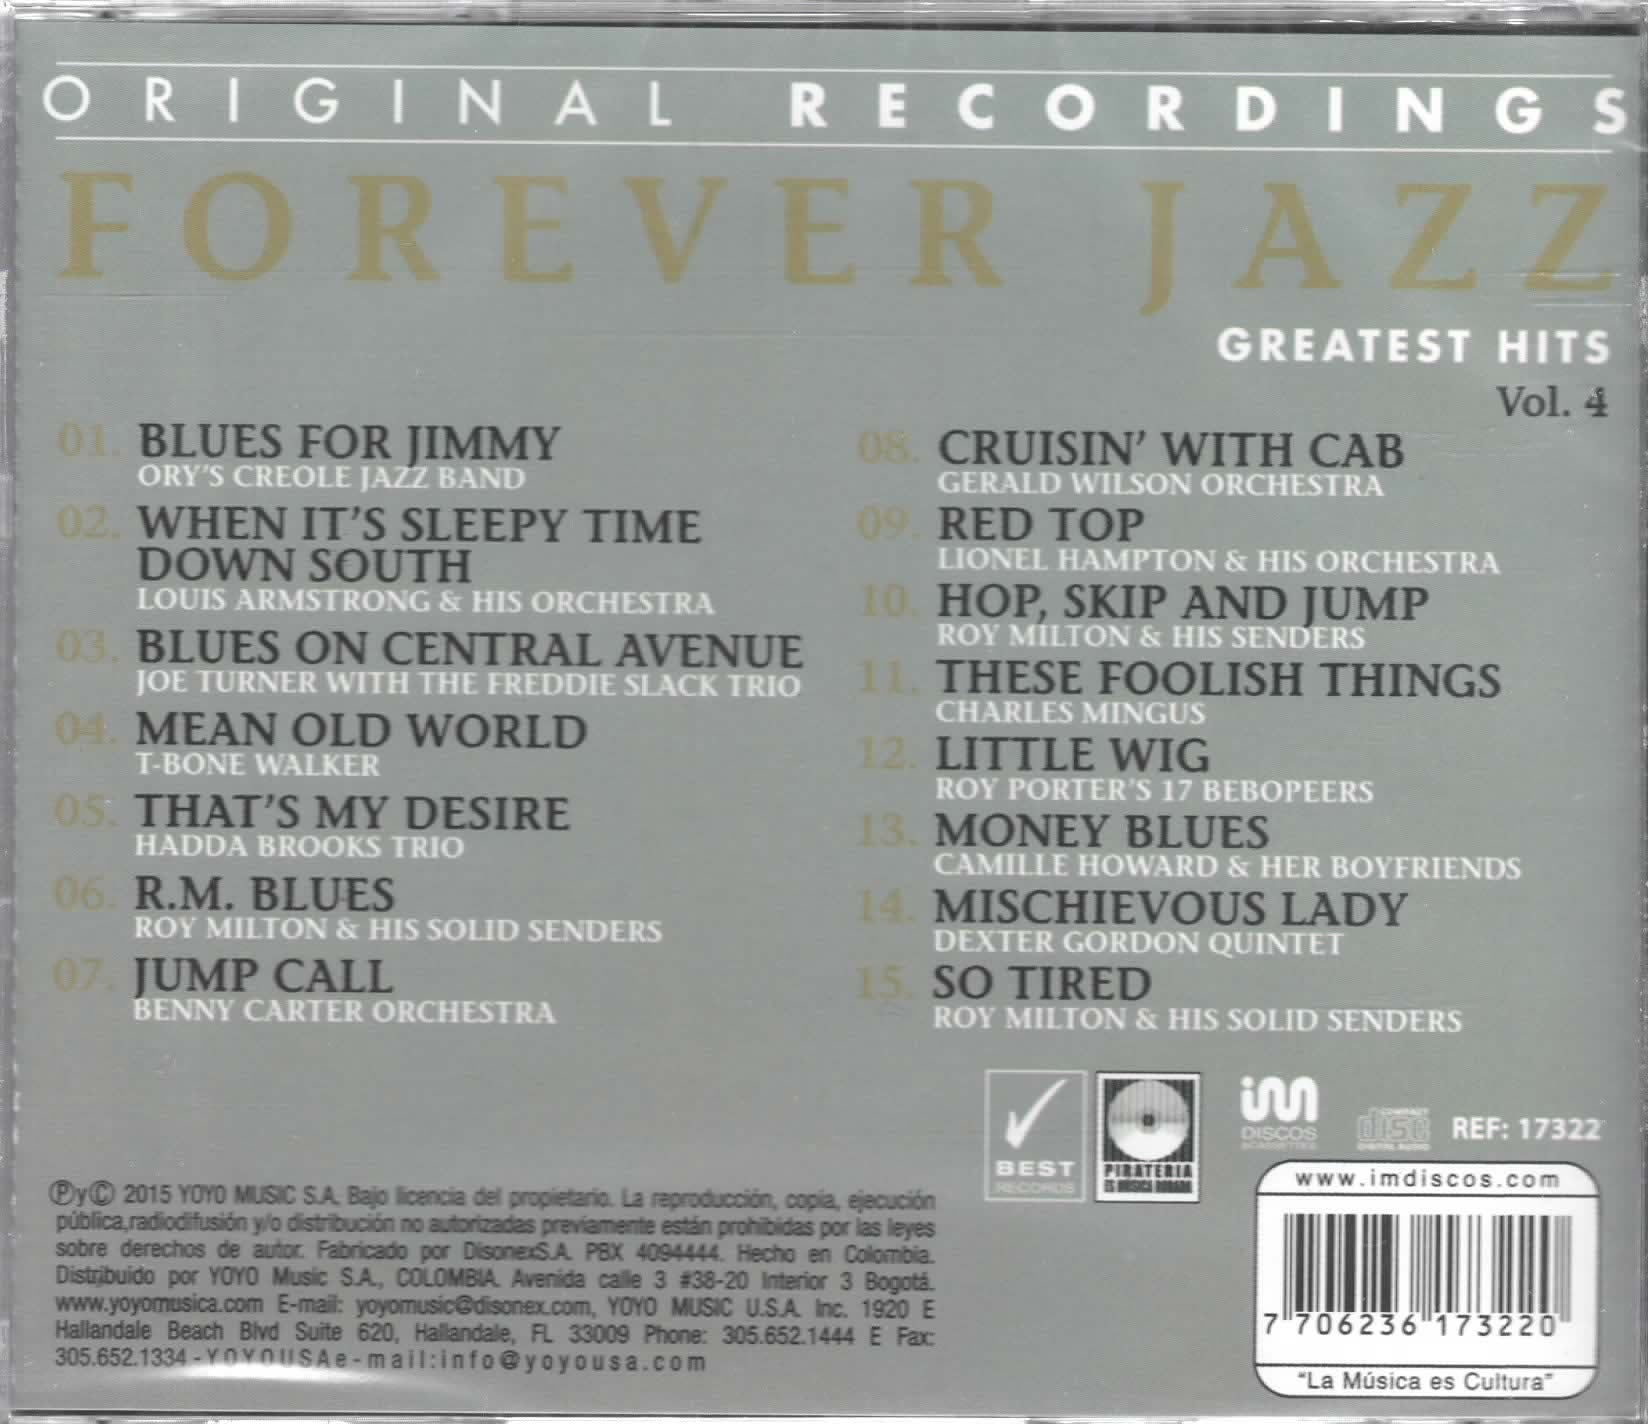 CD Forever Jazz - Greatest Hits Vol. 4